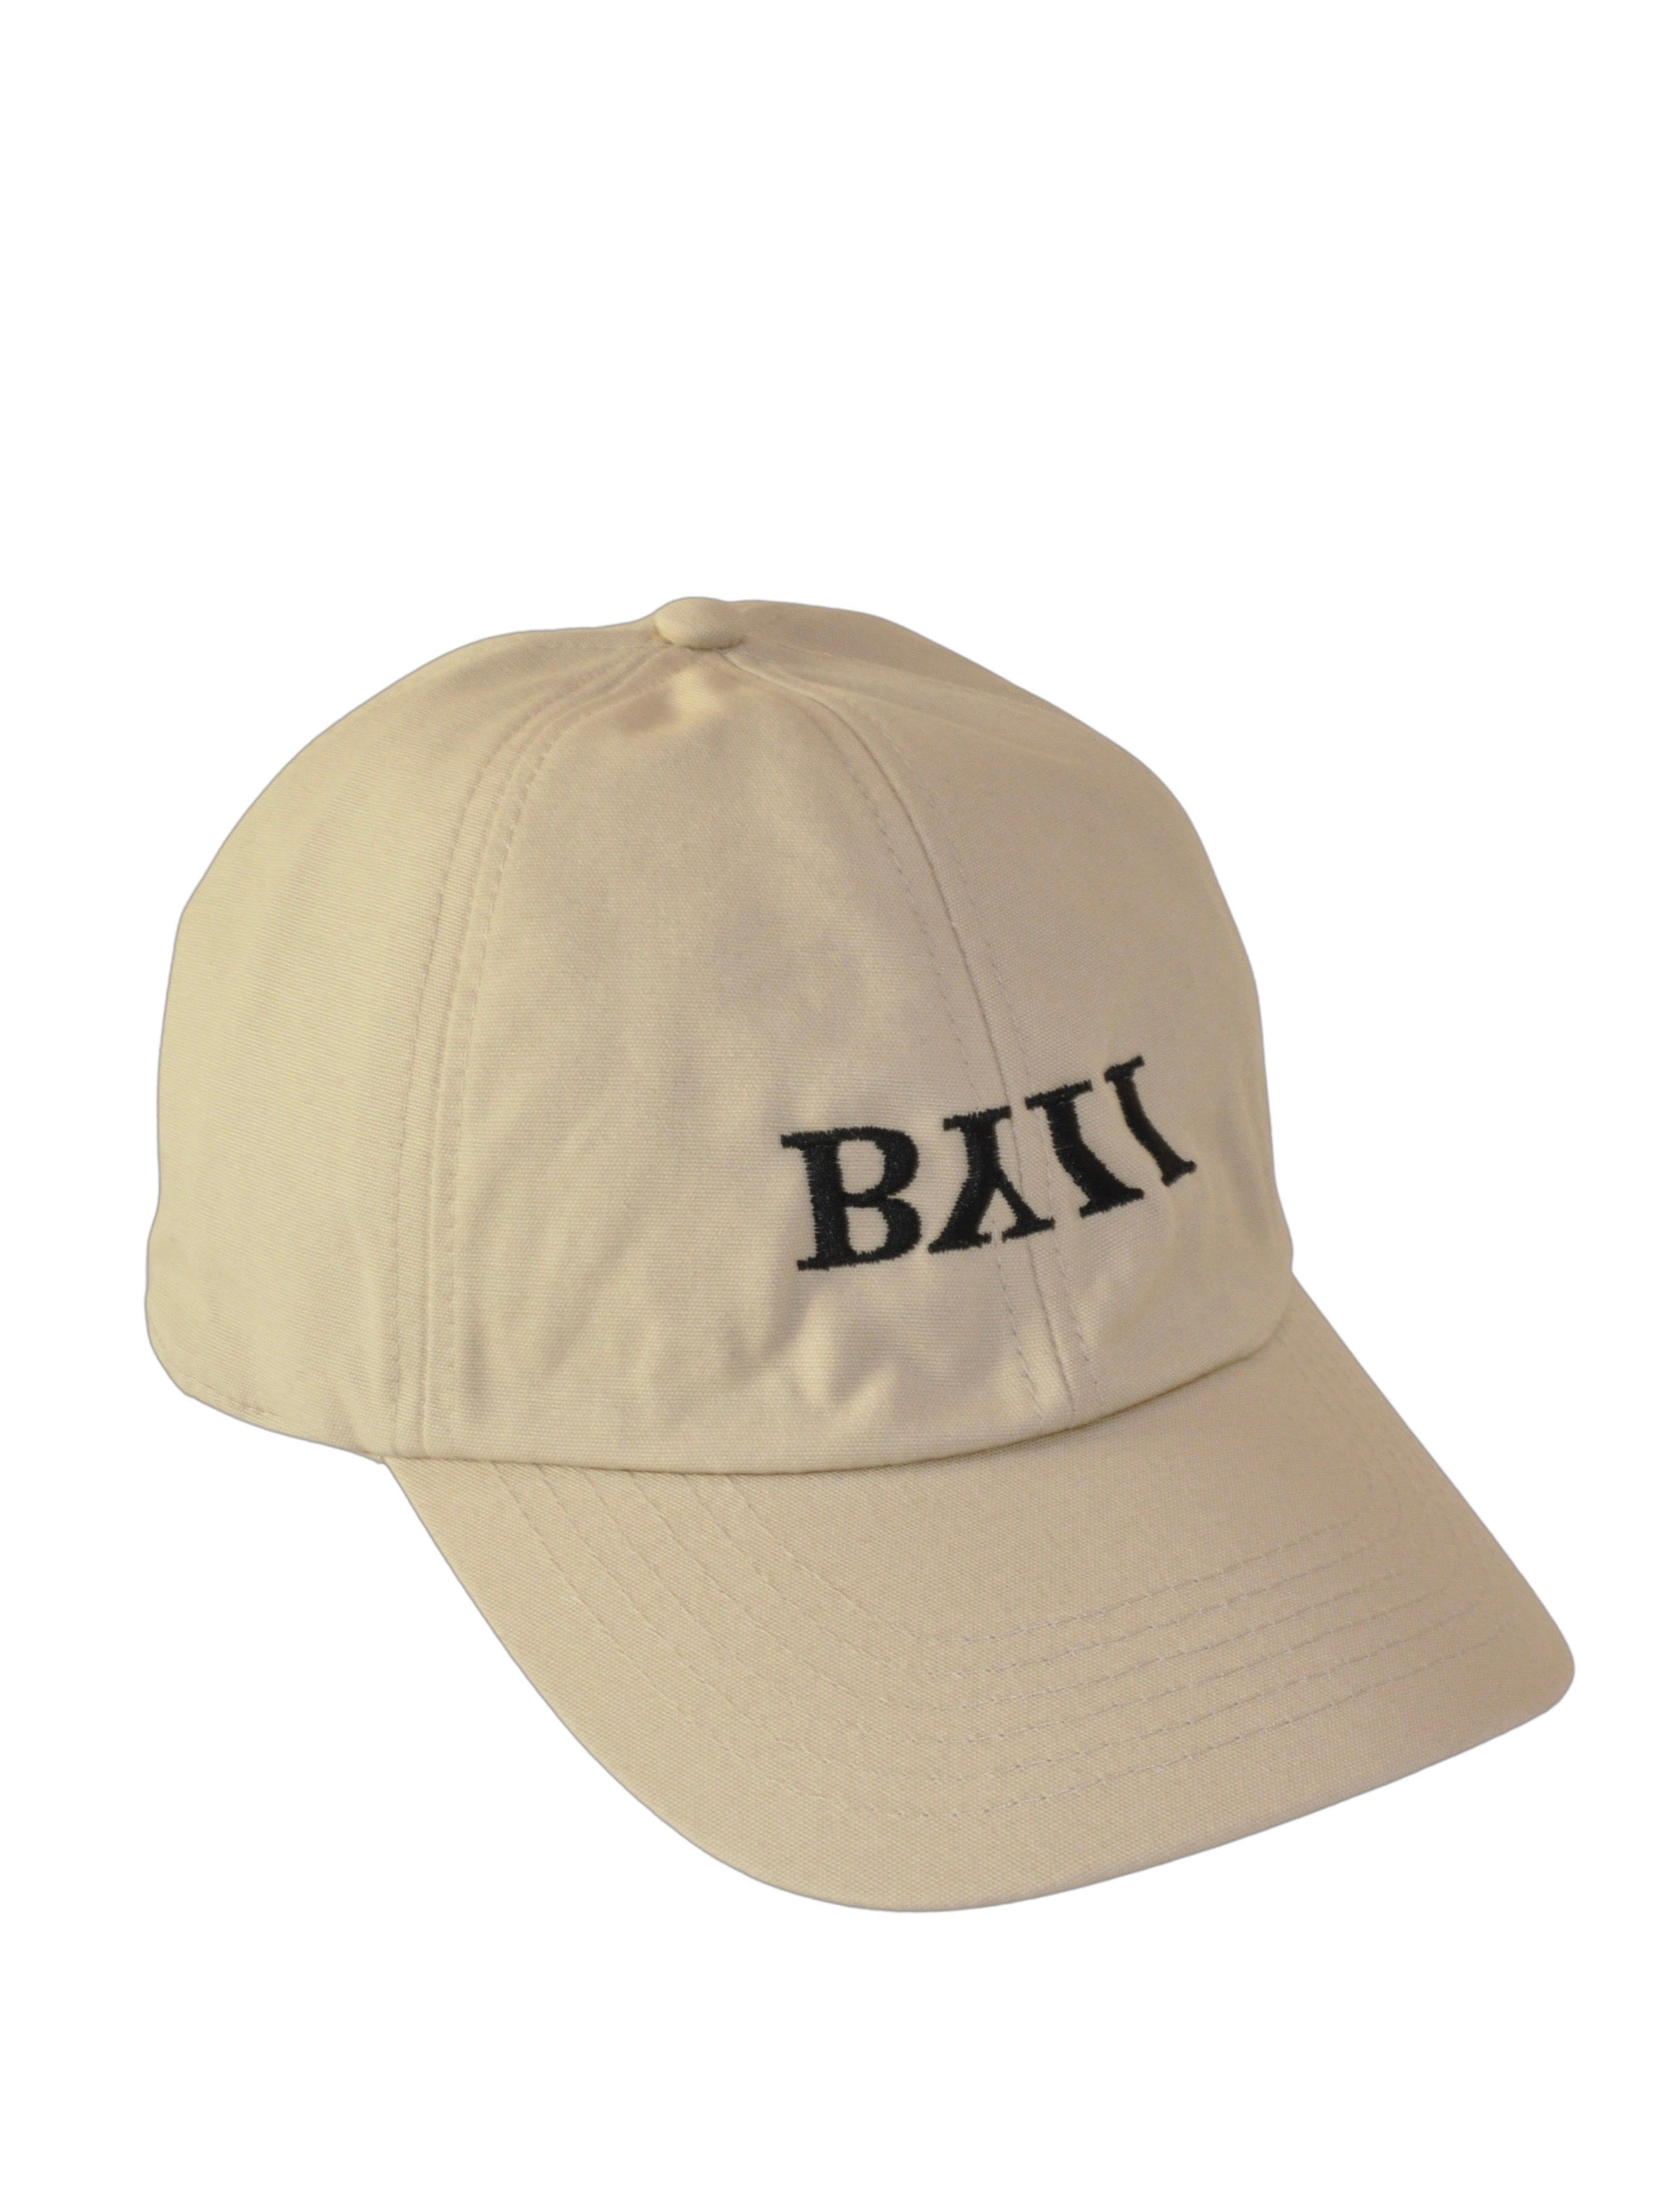 BY11 Organic Embroidered Cap - Sand